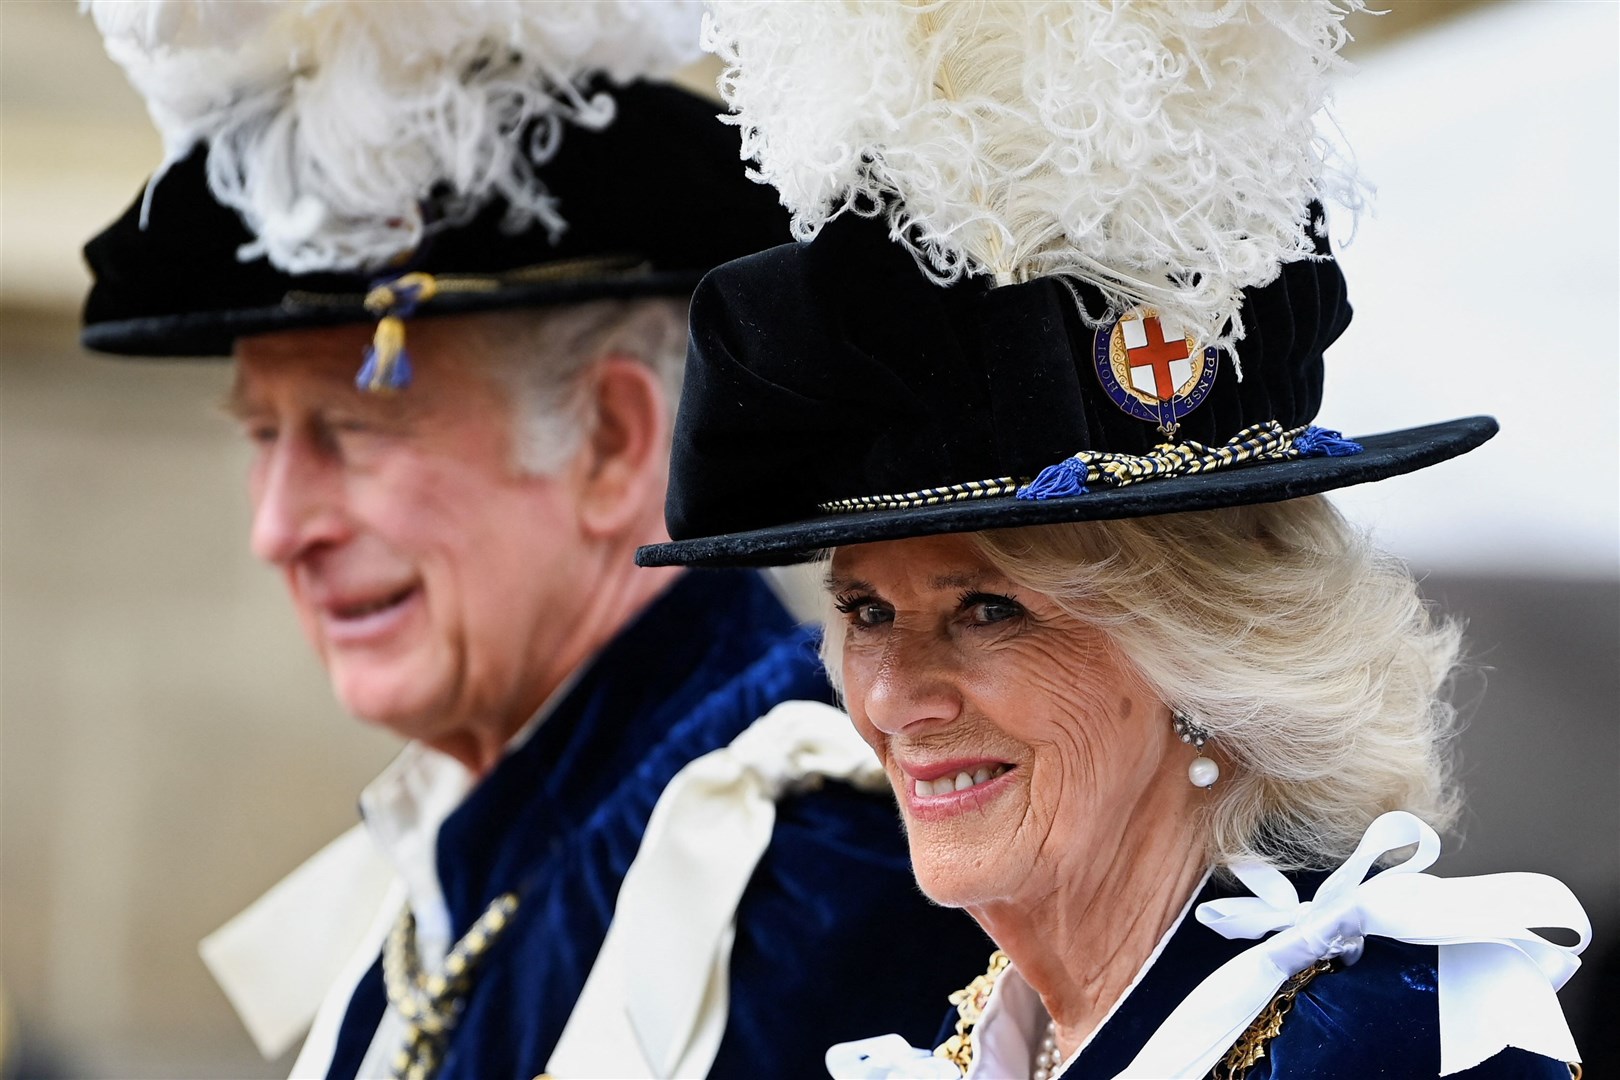 The Prince of Wales and the Duchess of Cornwall arriving for the annual Order of the Garter Service at St George’s Chapel, Windsor Castle (Toby Melville/PA)